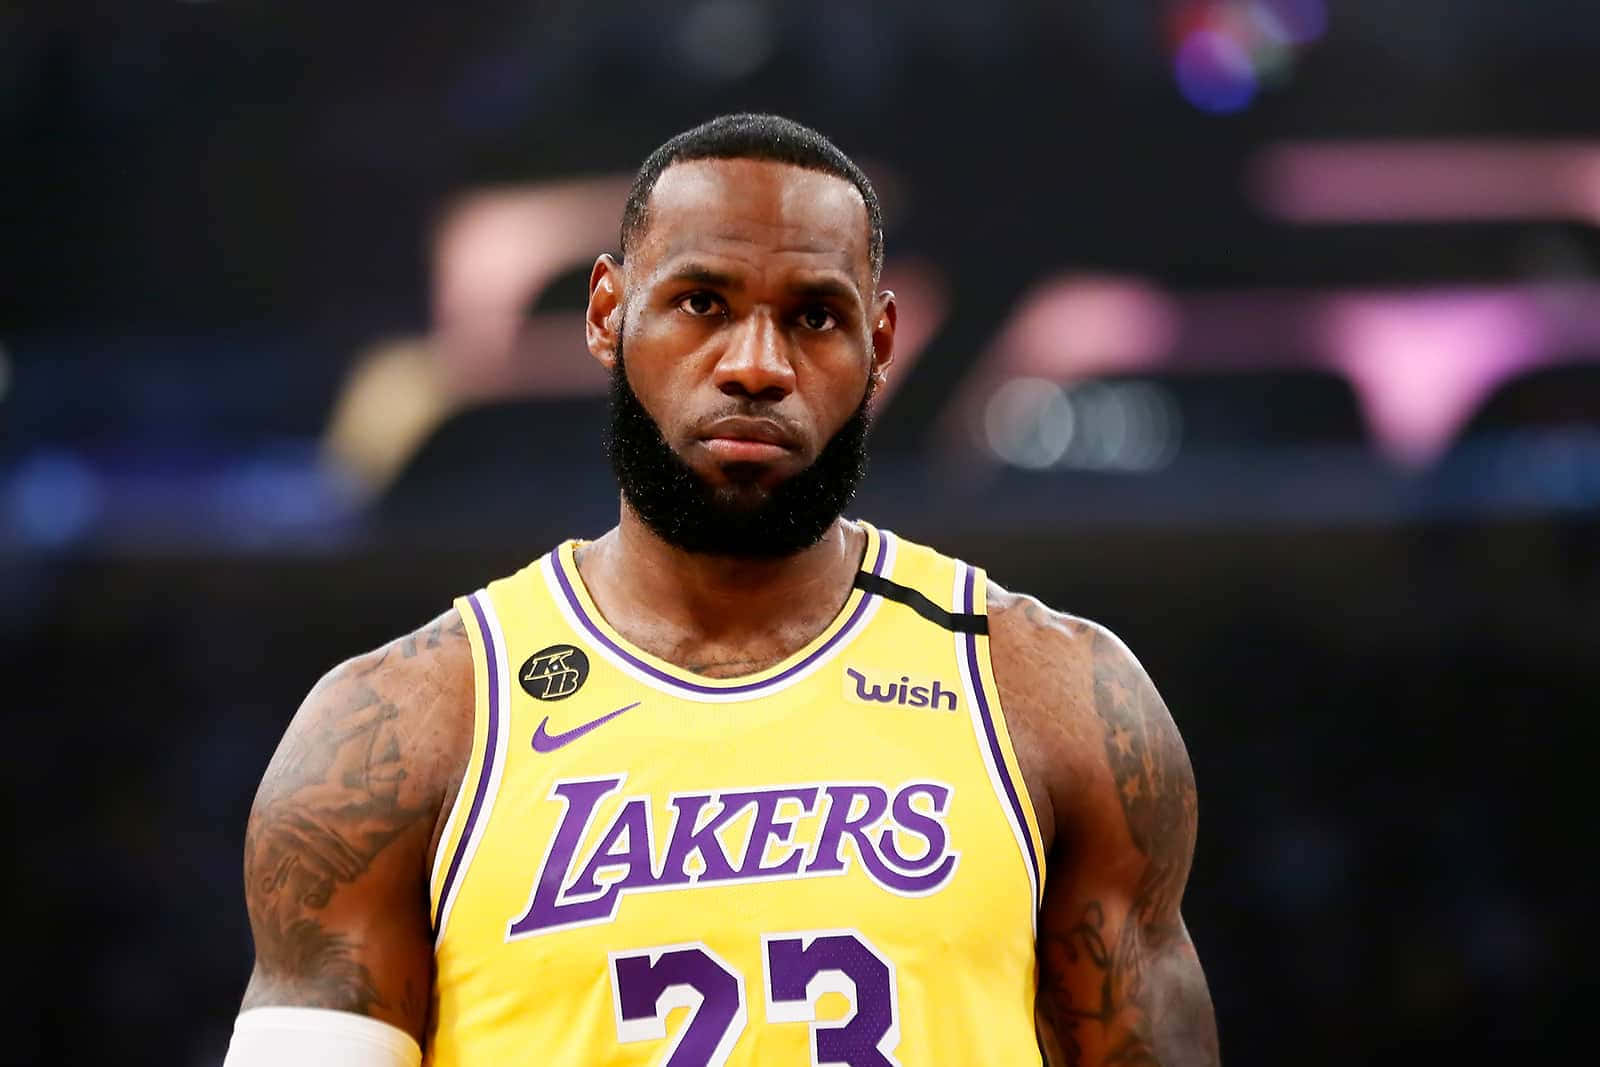 MVP LeBron James celebrates in the stands after his Lakers won the 2020 NBA Finals